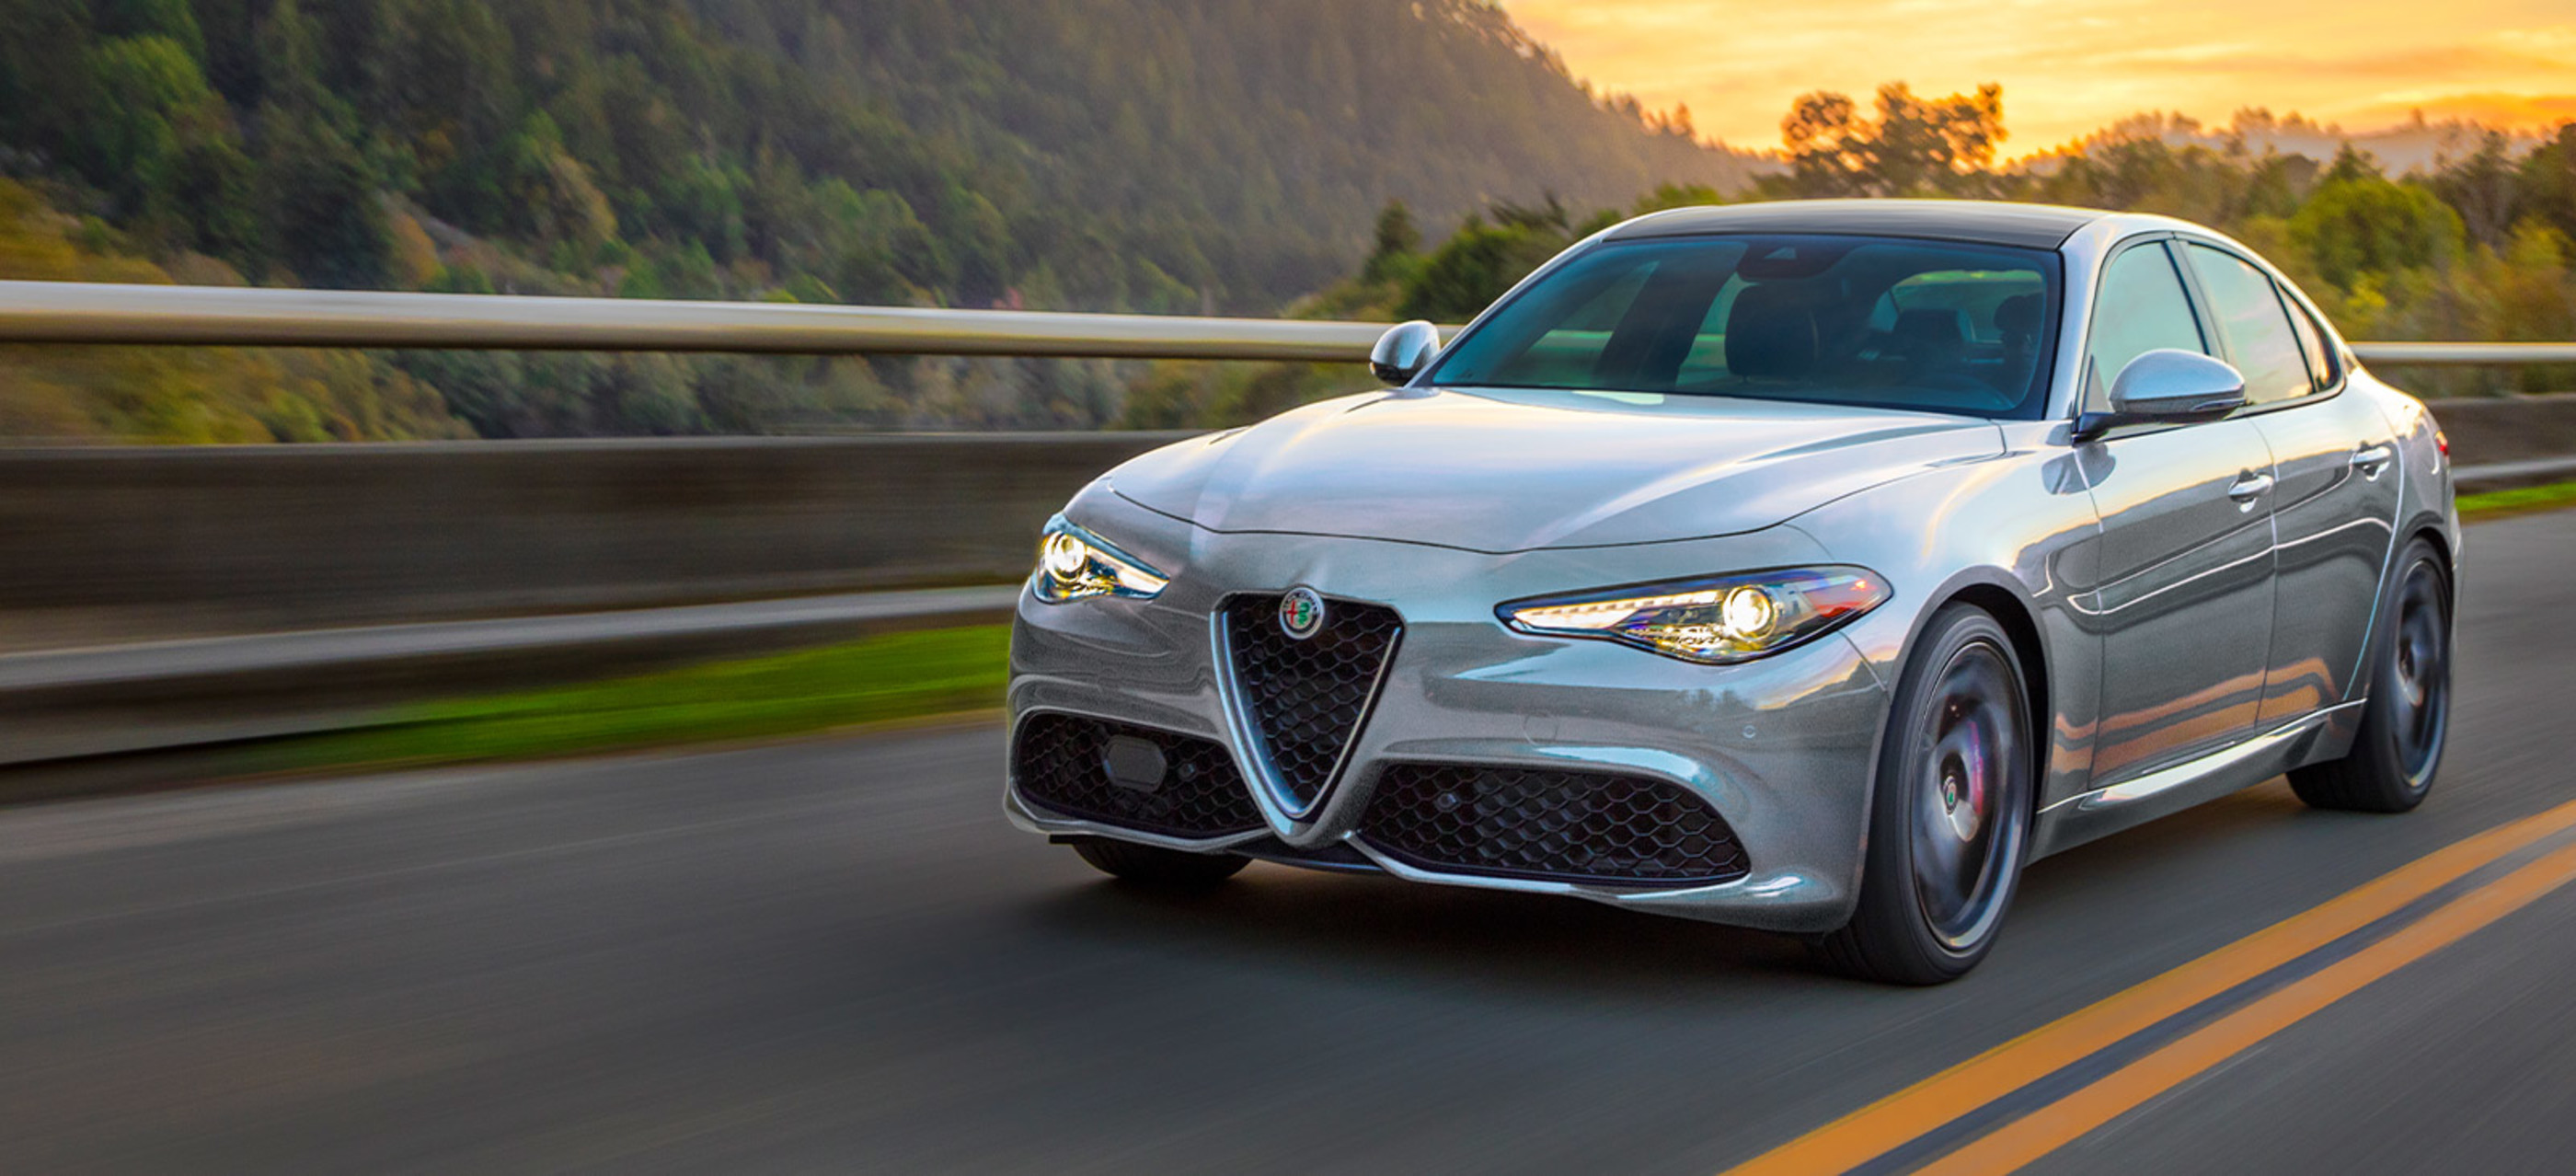 Front view of a silver Alfa Romeo Giulia, being driven on road in the mountains